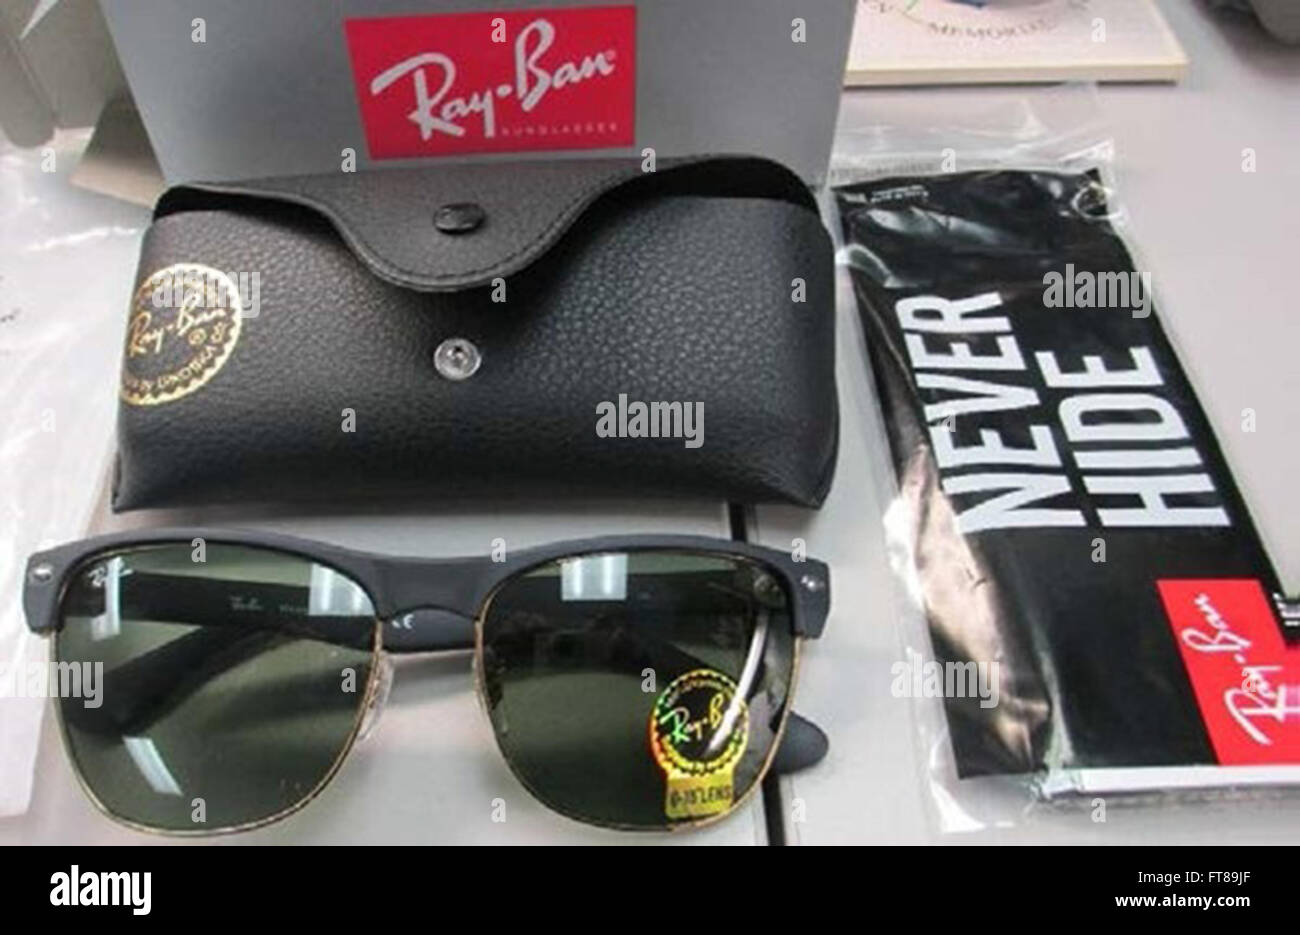 TAMPA, Fla. - U.S. Customs and Border Protection (CBP) officers in Tampa seized over 860 counterfeit Ray-Ban sunglasses arriving in a shipment from China. Photos provided by: U.S. Customs and Border Protection Stock Photo